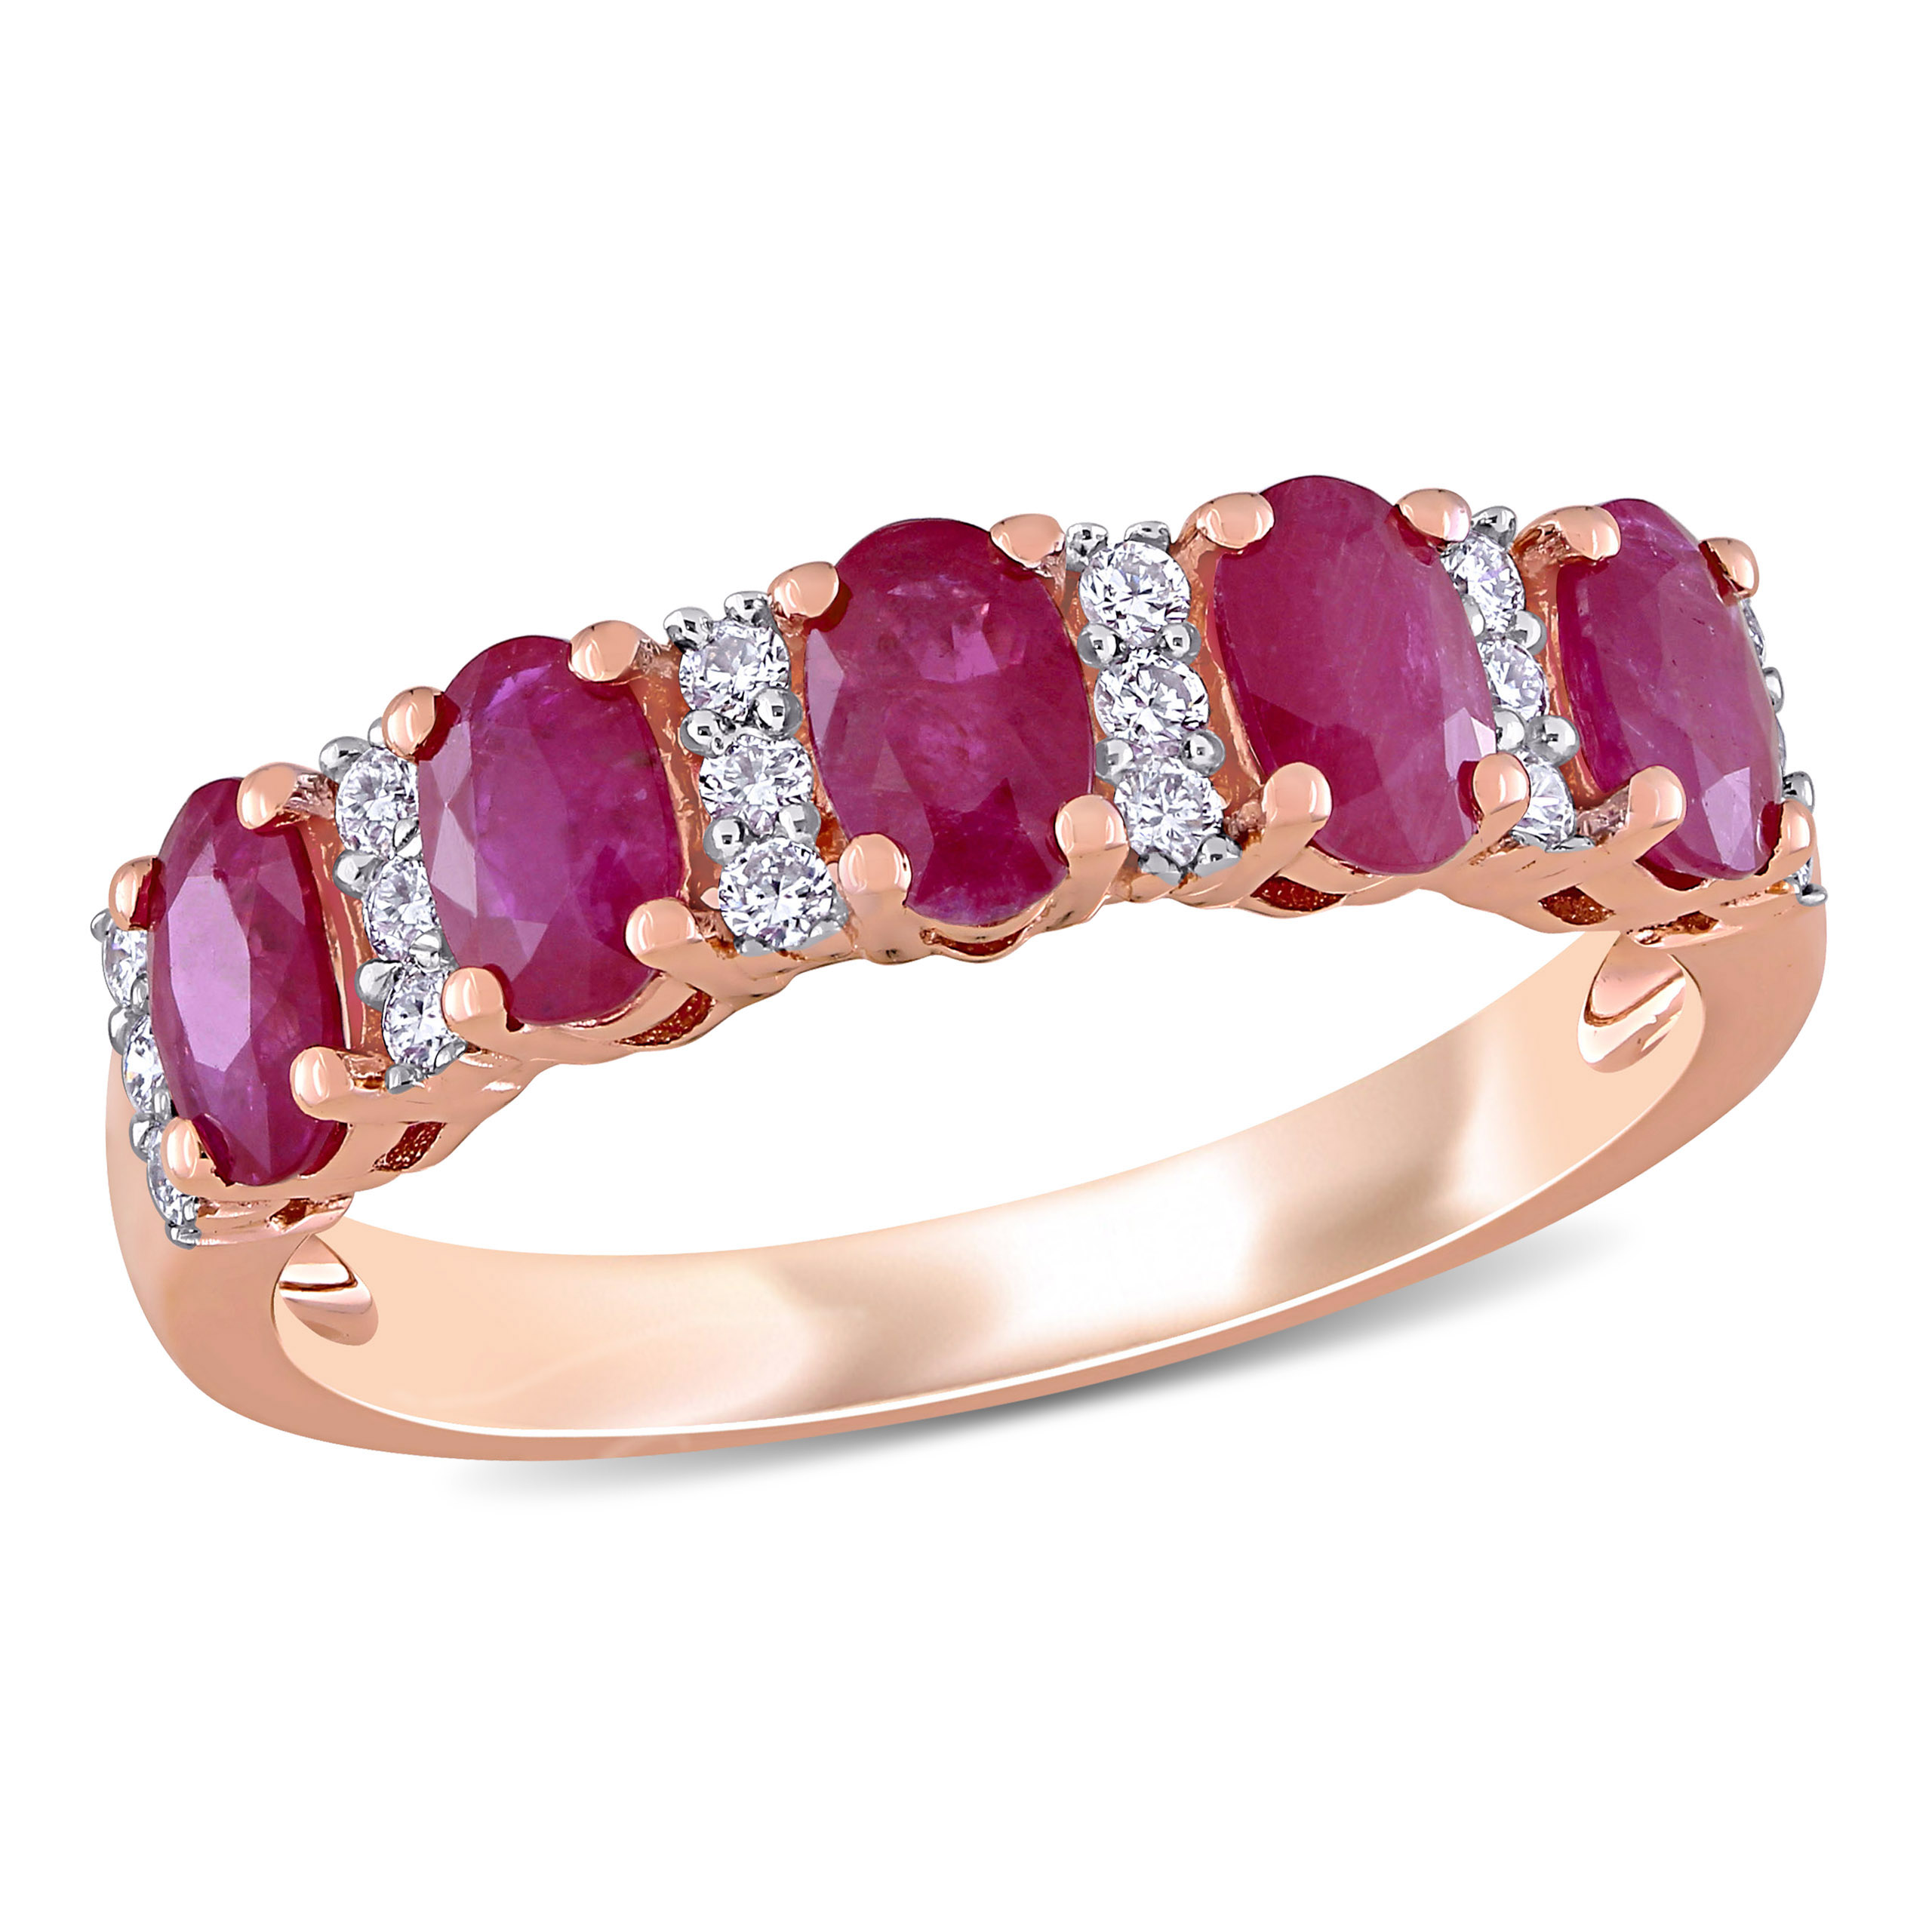 1 3/8 CT TGW Ruby and 1/6 CT TW Diamond Semi Eternity Ring in 14k Rose Gold